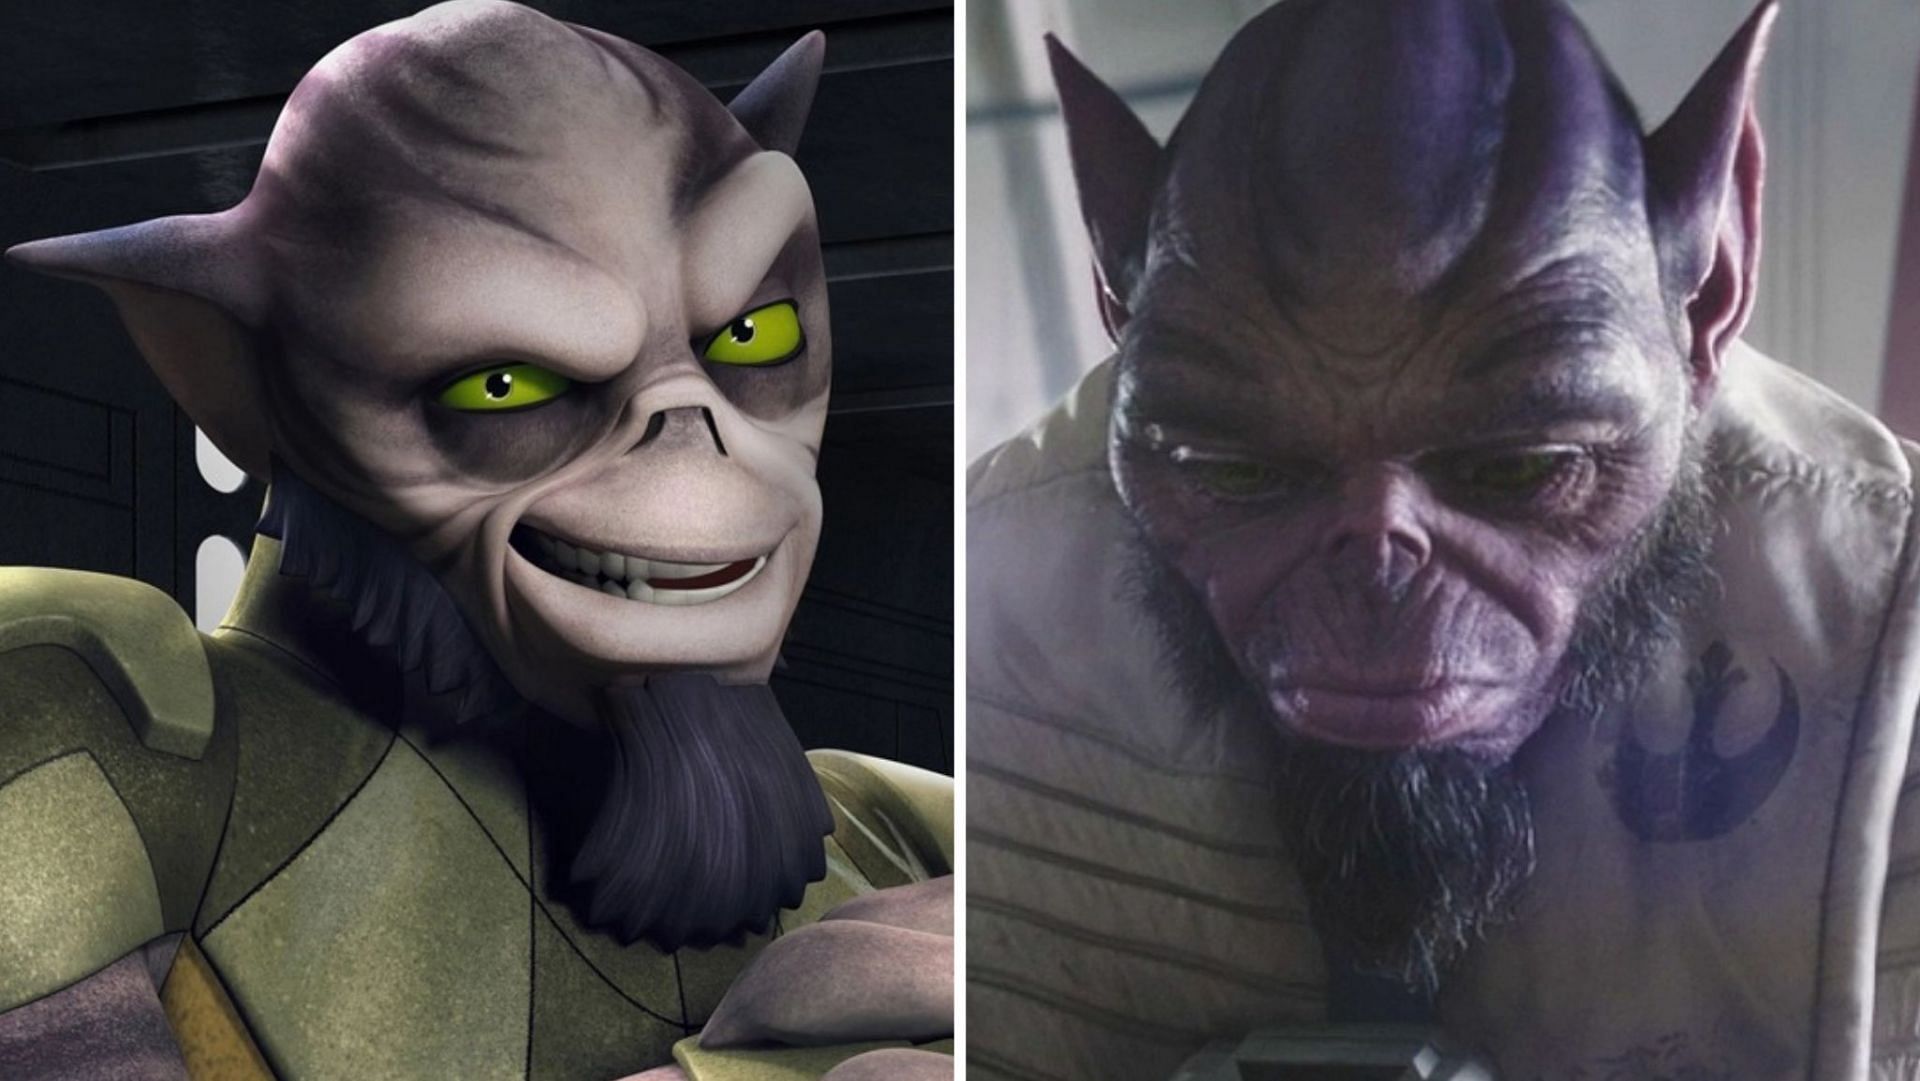 The appearance of Zeb Orrelios in the series has sparked speculation about his potential role in the future of the Star Wars franchise (Image via Lucasfilm)